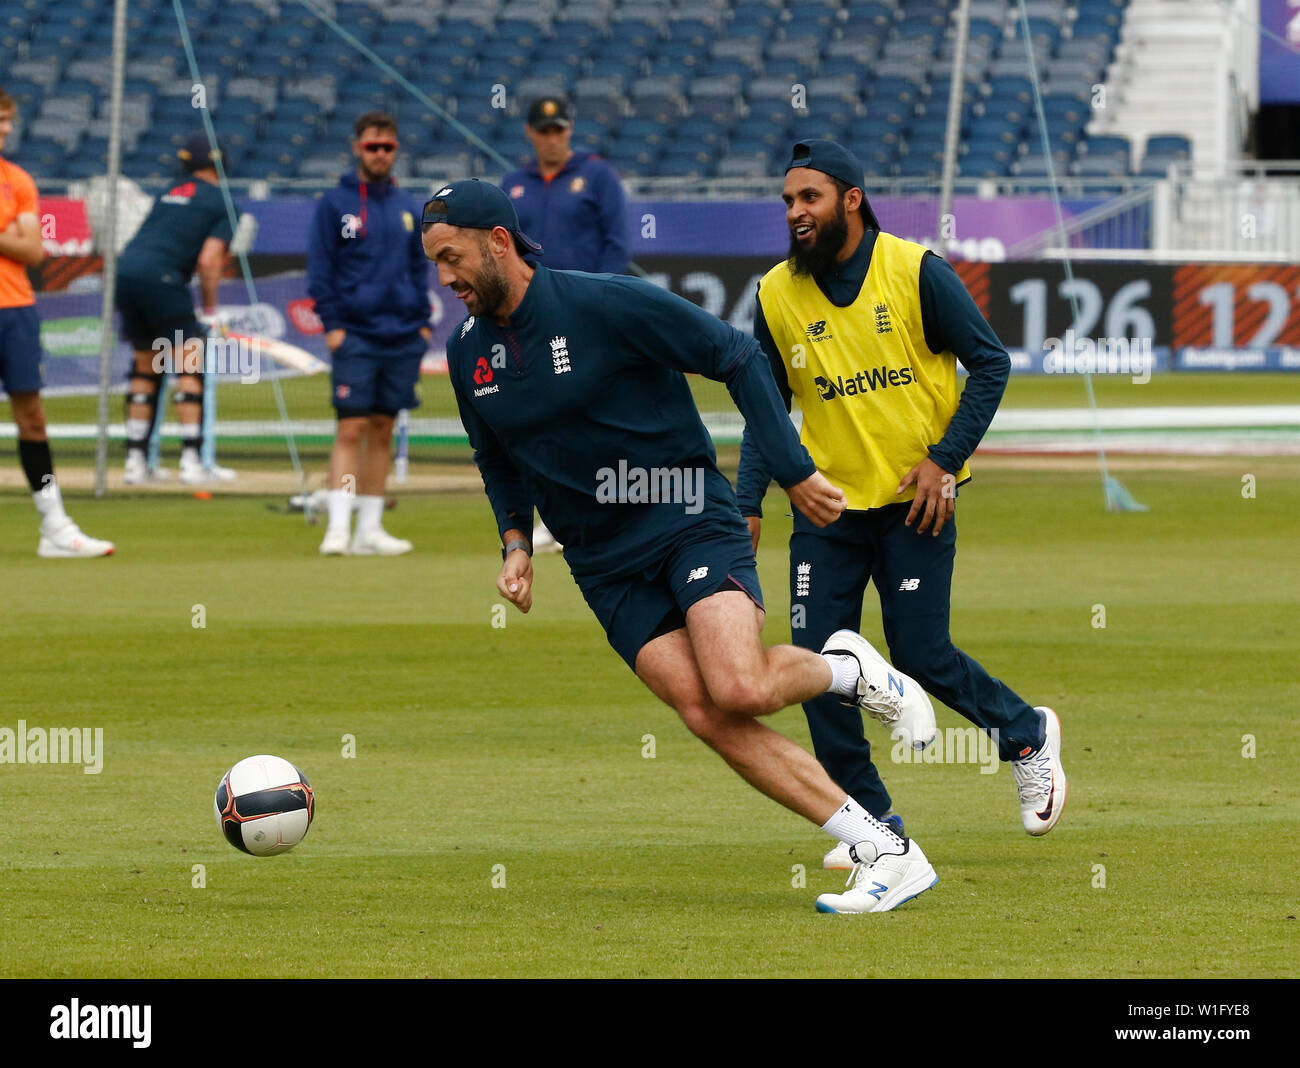 Emirates Riverside, Chester-le-Street, Durham, UK. 2nd July, 2019. ICC World Cup Cricket, Training and Press conferences, Liam Plunkett goes past Adil Rashid as they play football during England's training session this afternoon ahead of tomorrow's final group stage match versus New Zealand Credit: Action Plus Sports/Alamy Live News Stock Photo